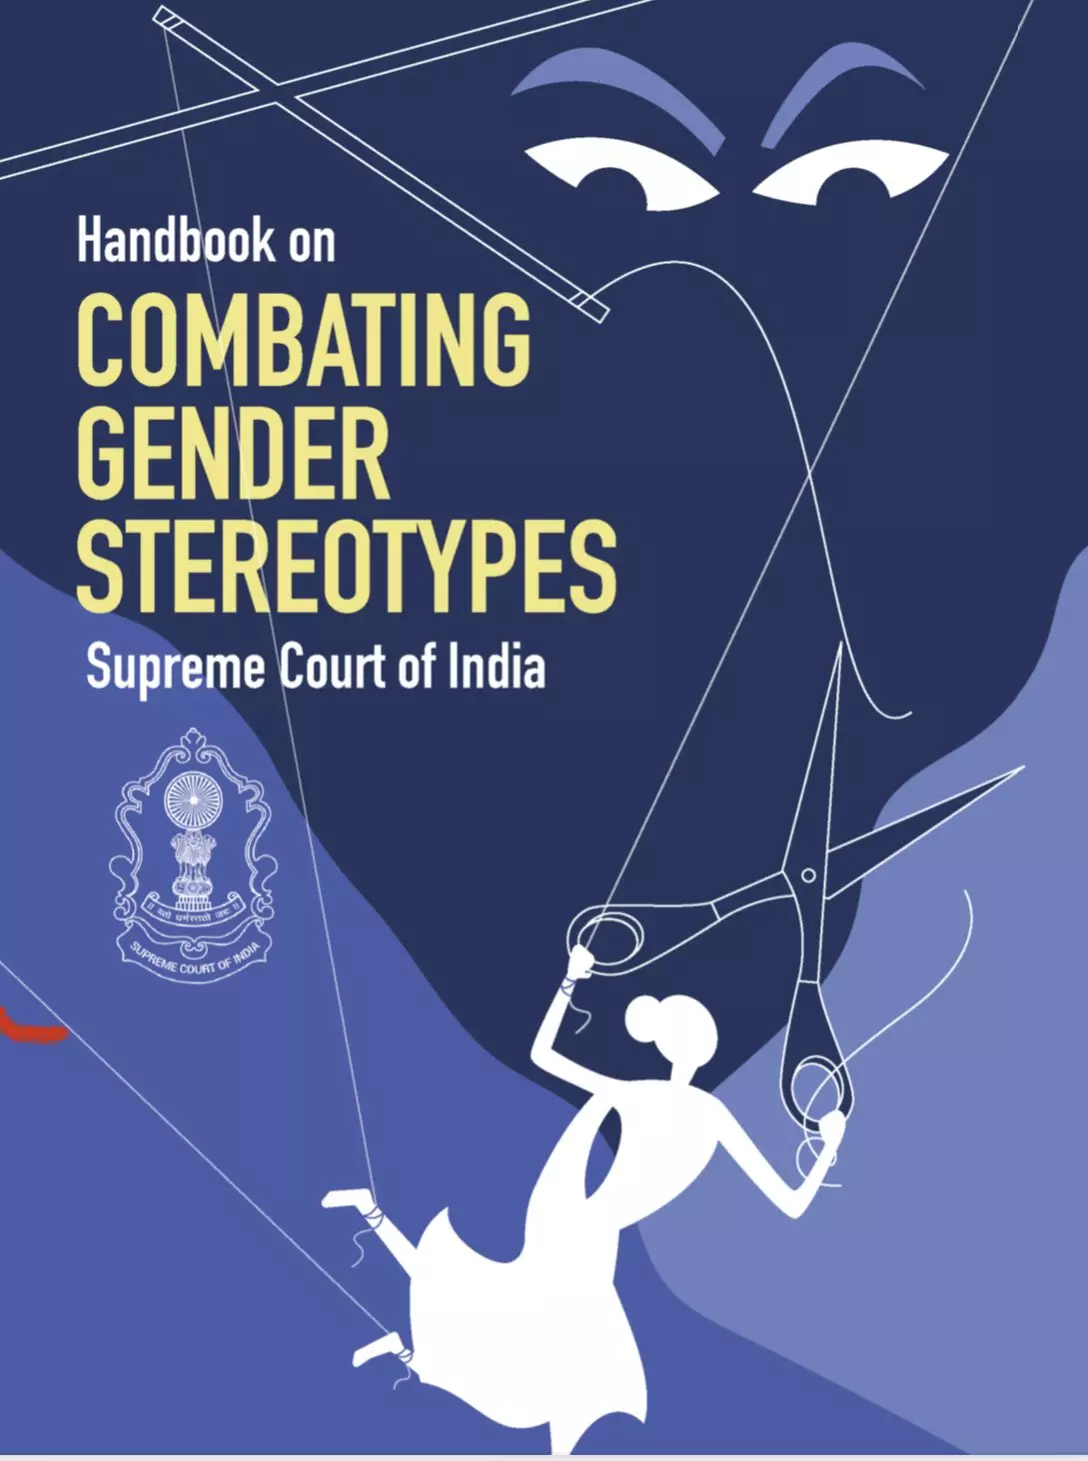 ‘No woman of easy virtue’: SC unveils handbook to combat gender stereotypes